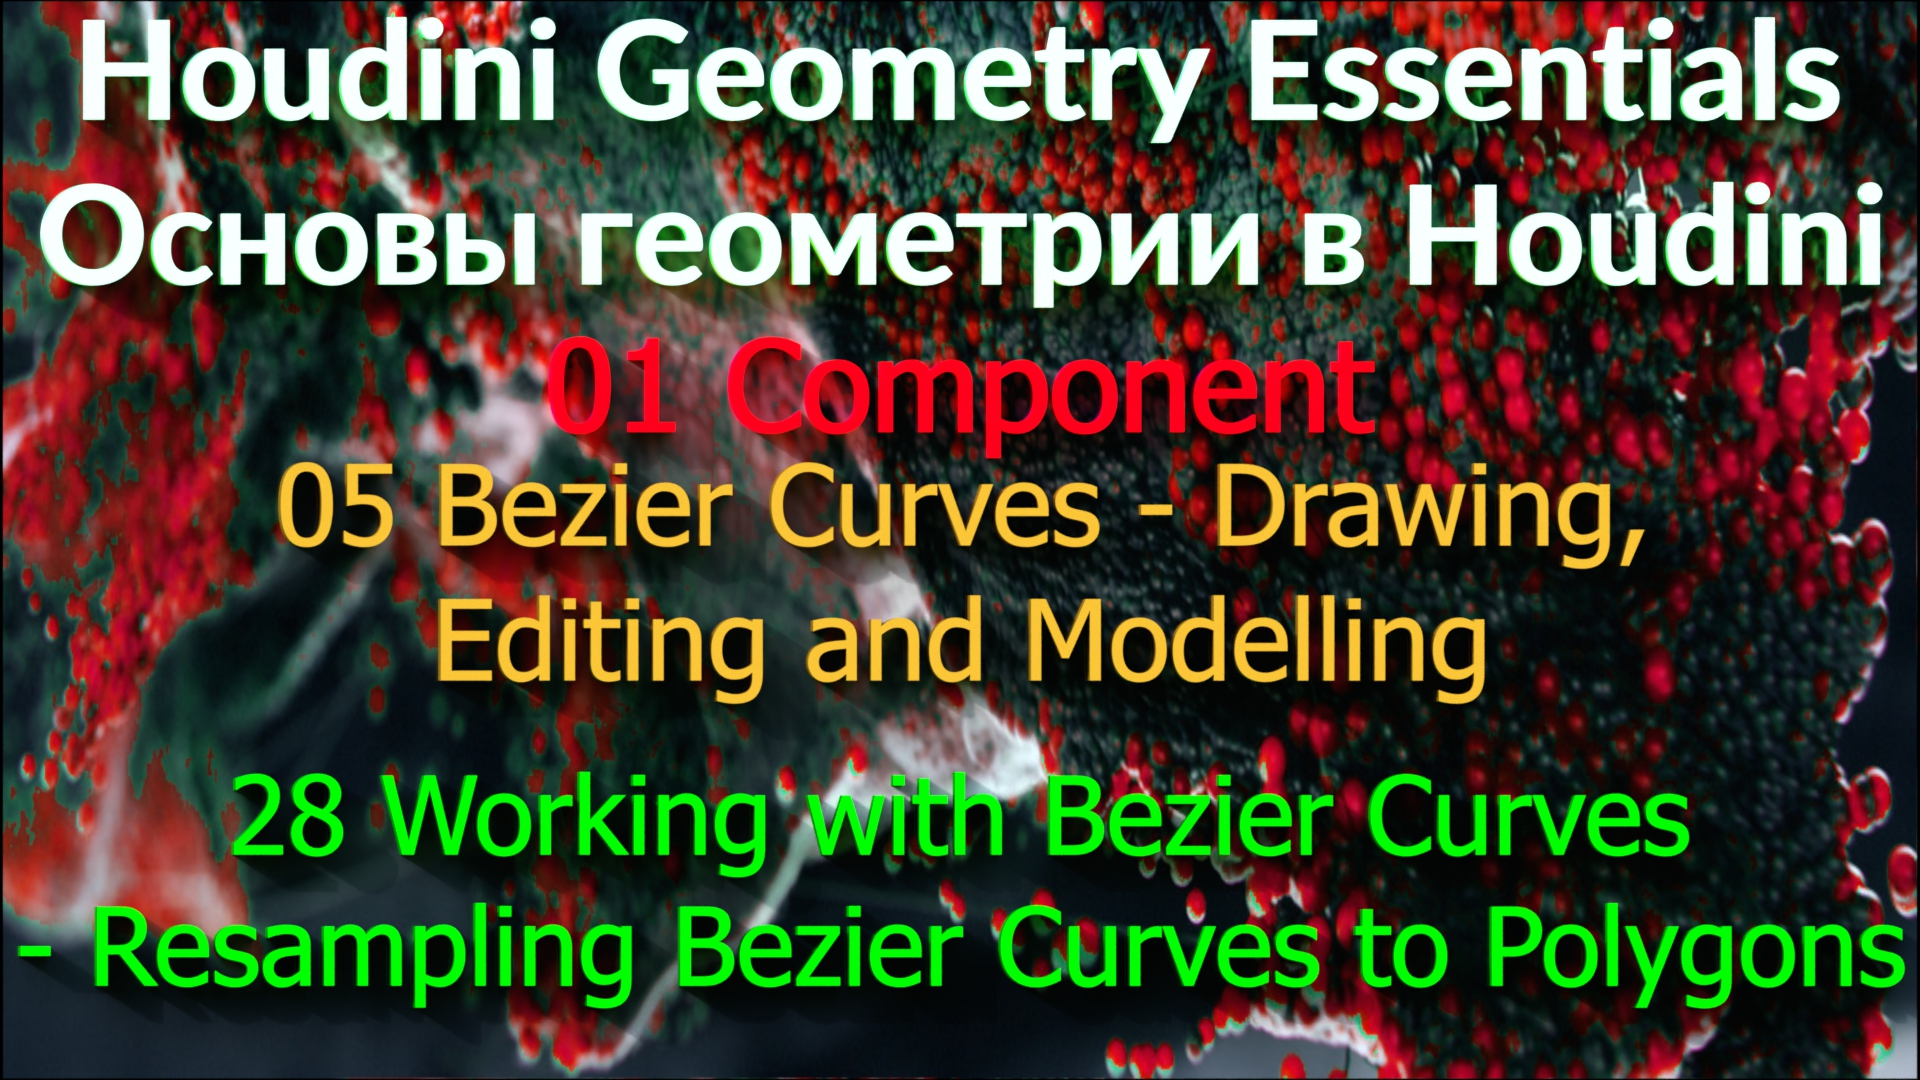 01_05_28. Working with Bezier Curves - Resampling Bezier Curves to Polygons